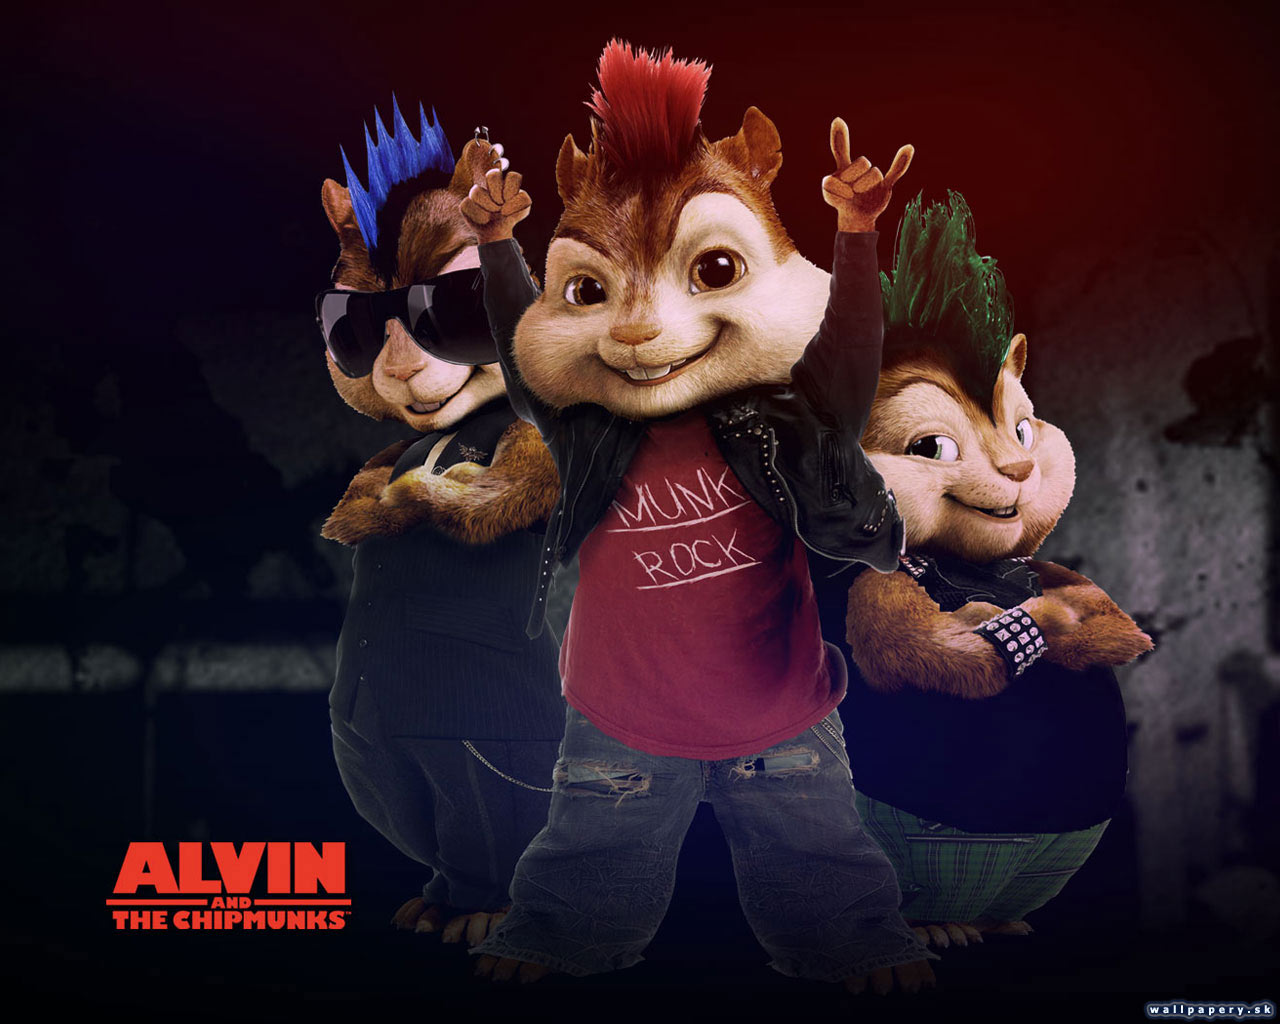 Alvin and The Chipmunks - wallpaper 11